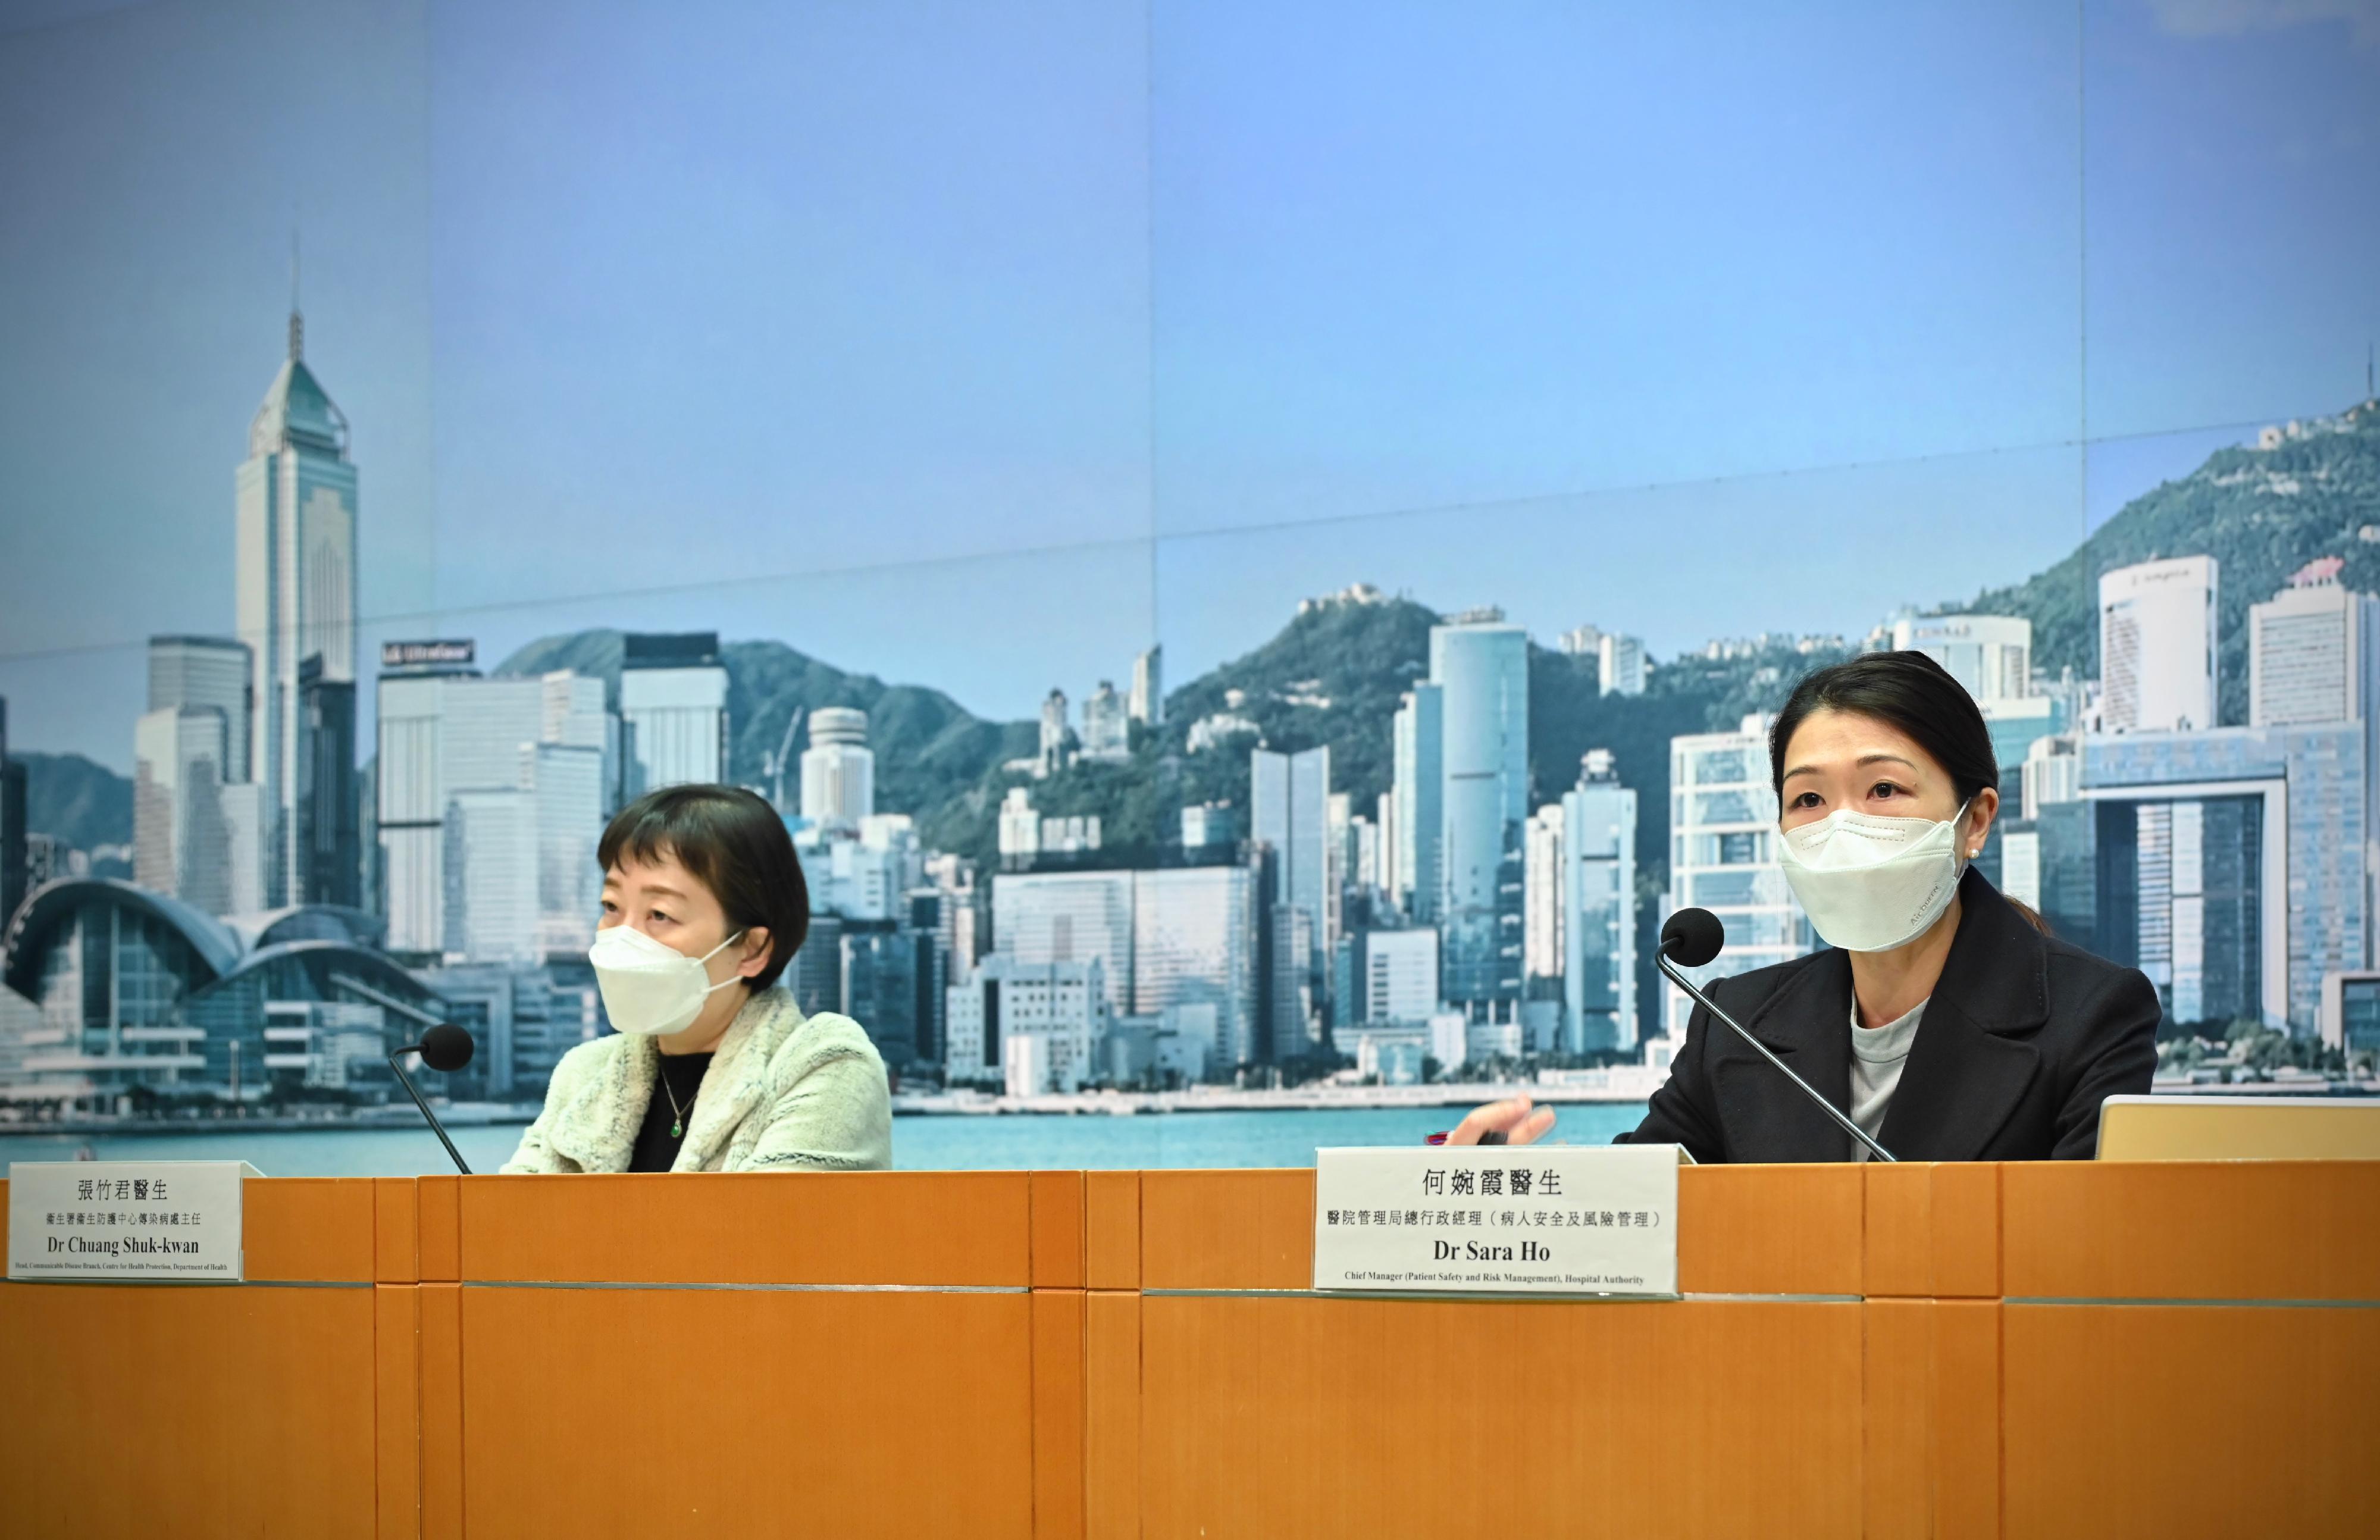 The Head of the Communicable Disease Branch of the Centre for Health Protection of the Department of Health, Dr Chuang Shuk-kwan (left), and the Chief Manager (Patient Safety and Risk Management) of the Hospital Authority, Dr Sara Ho, hold a press briefing on the latest situation of COVID-19 today (March 30).